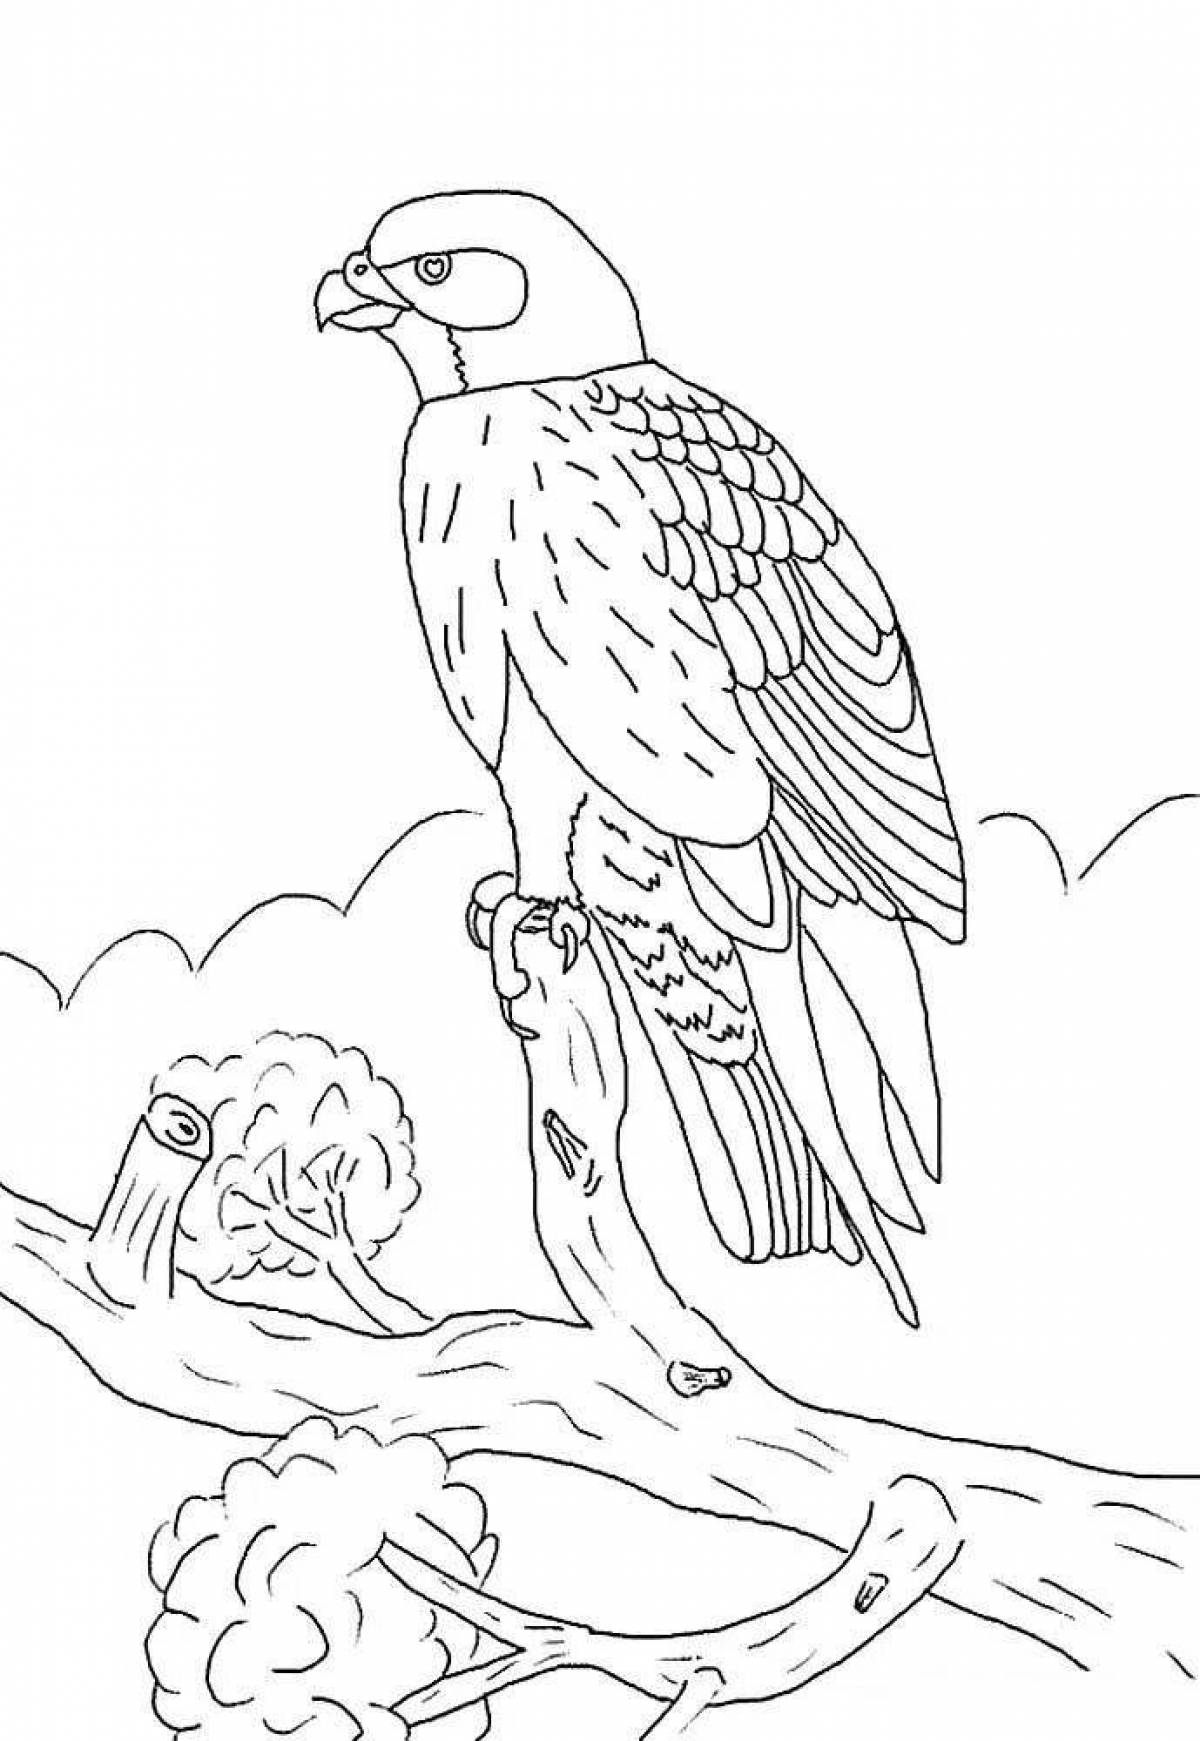 Coloring page playful falcon